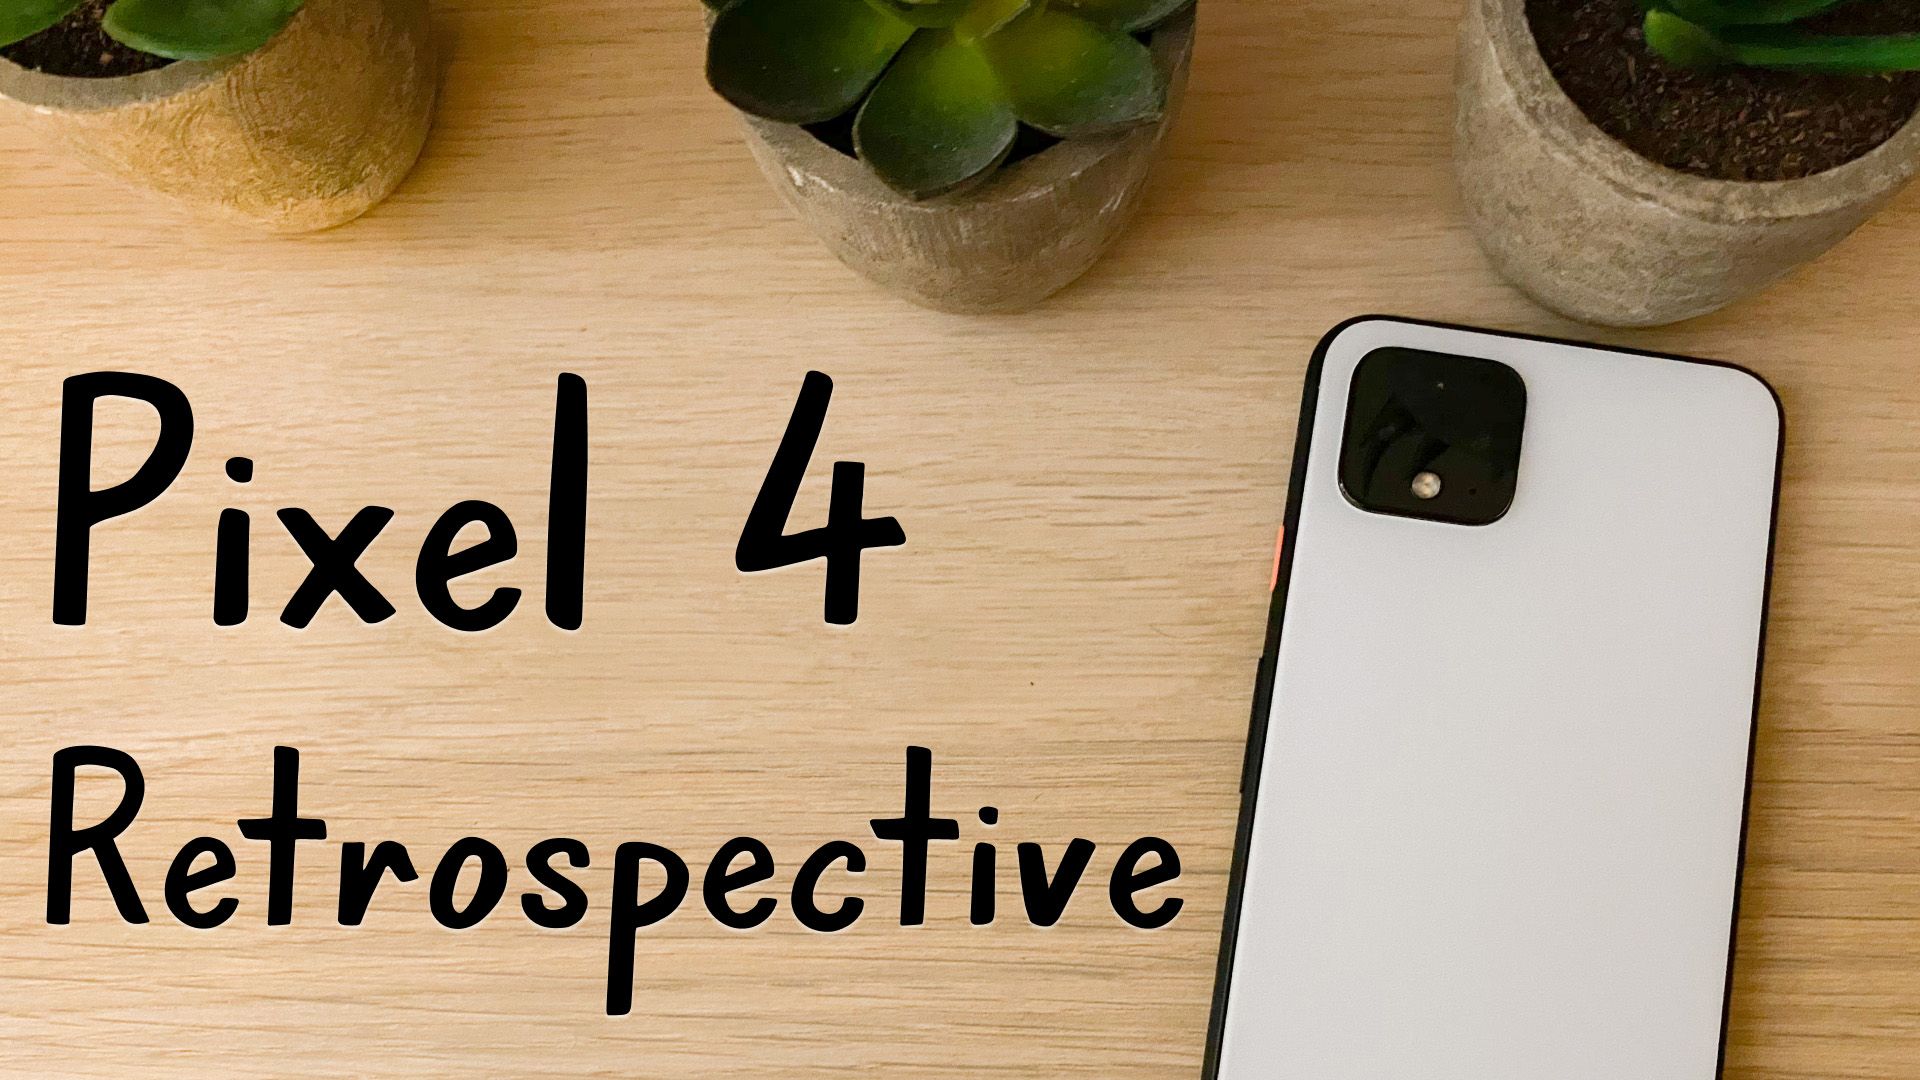 My One Year Retrospective on the Google Pixel 4